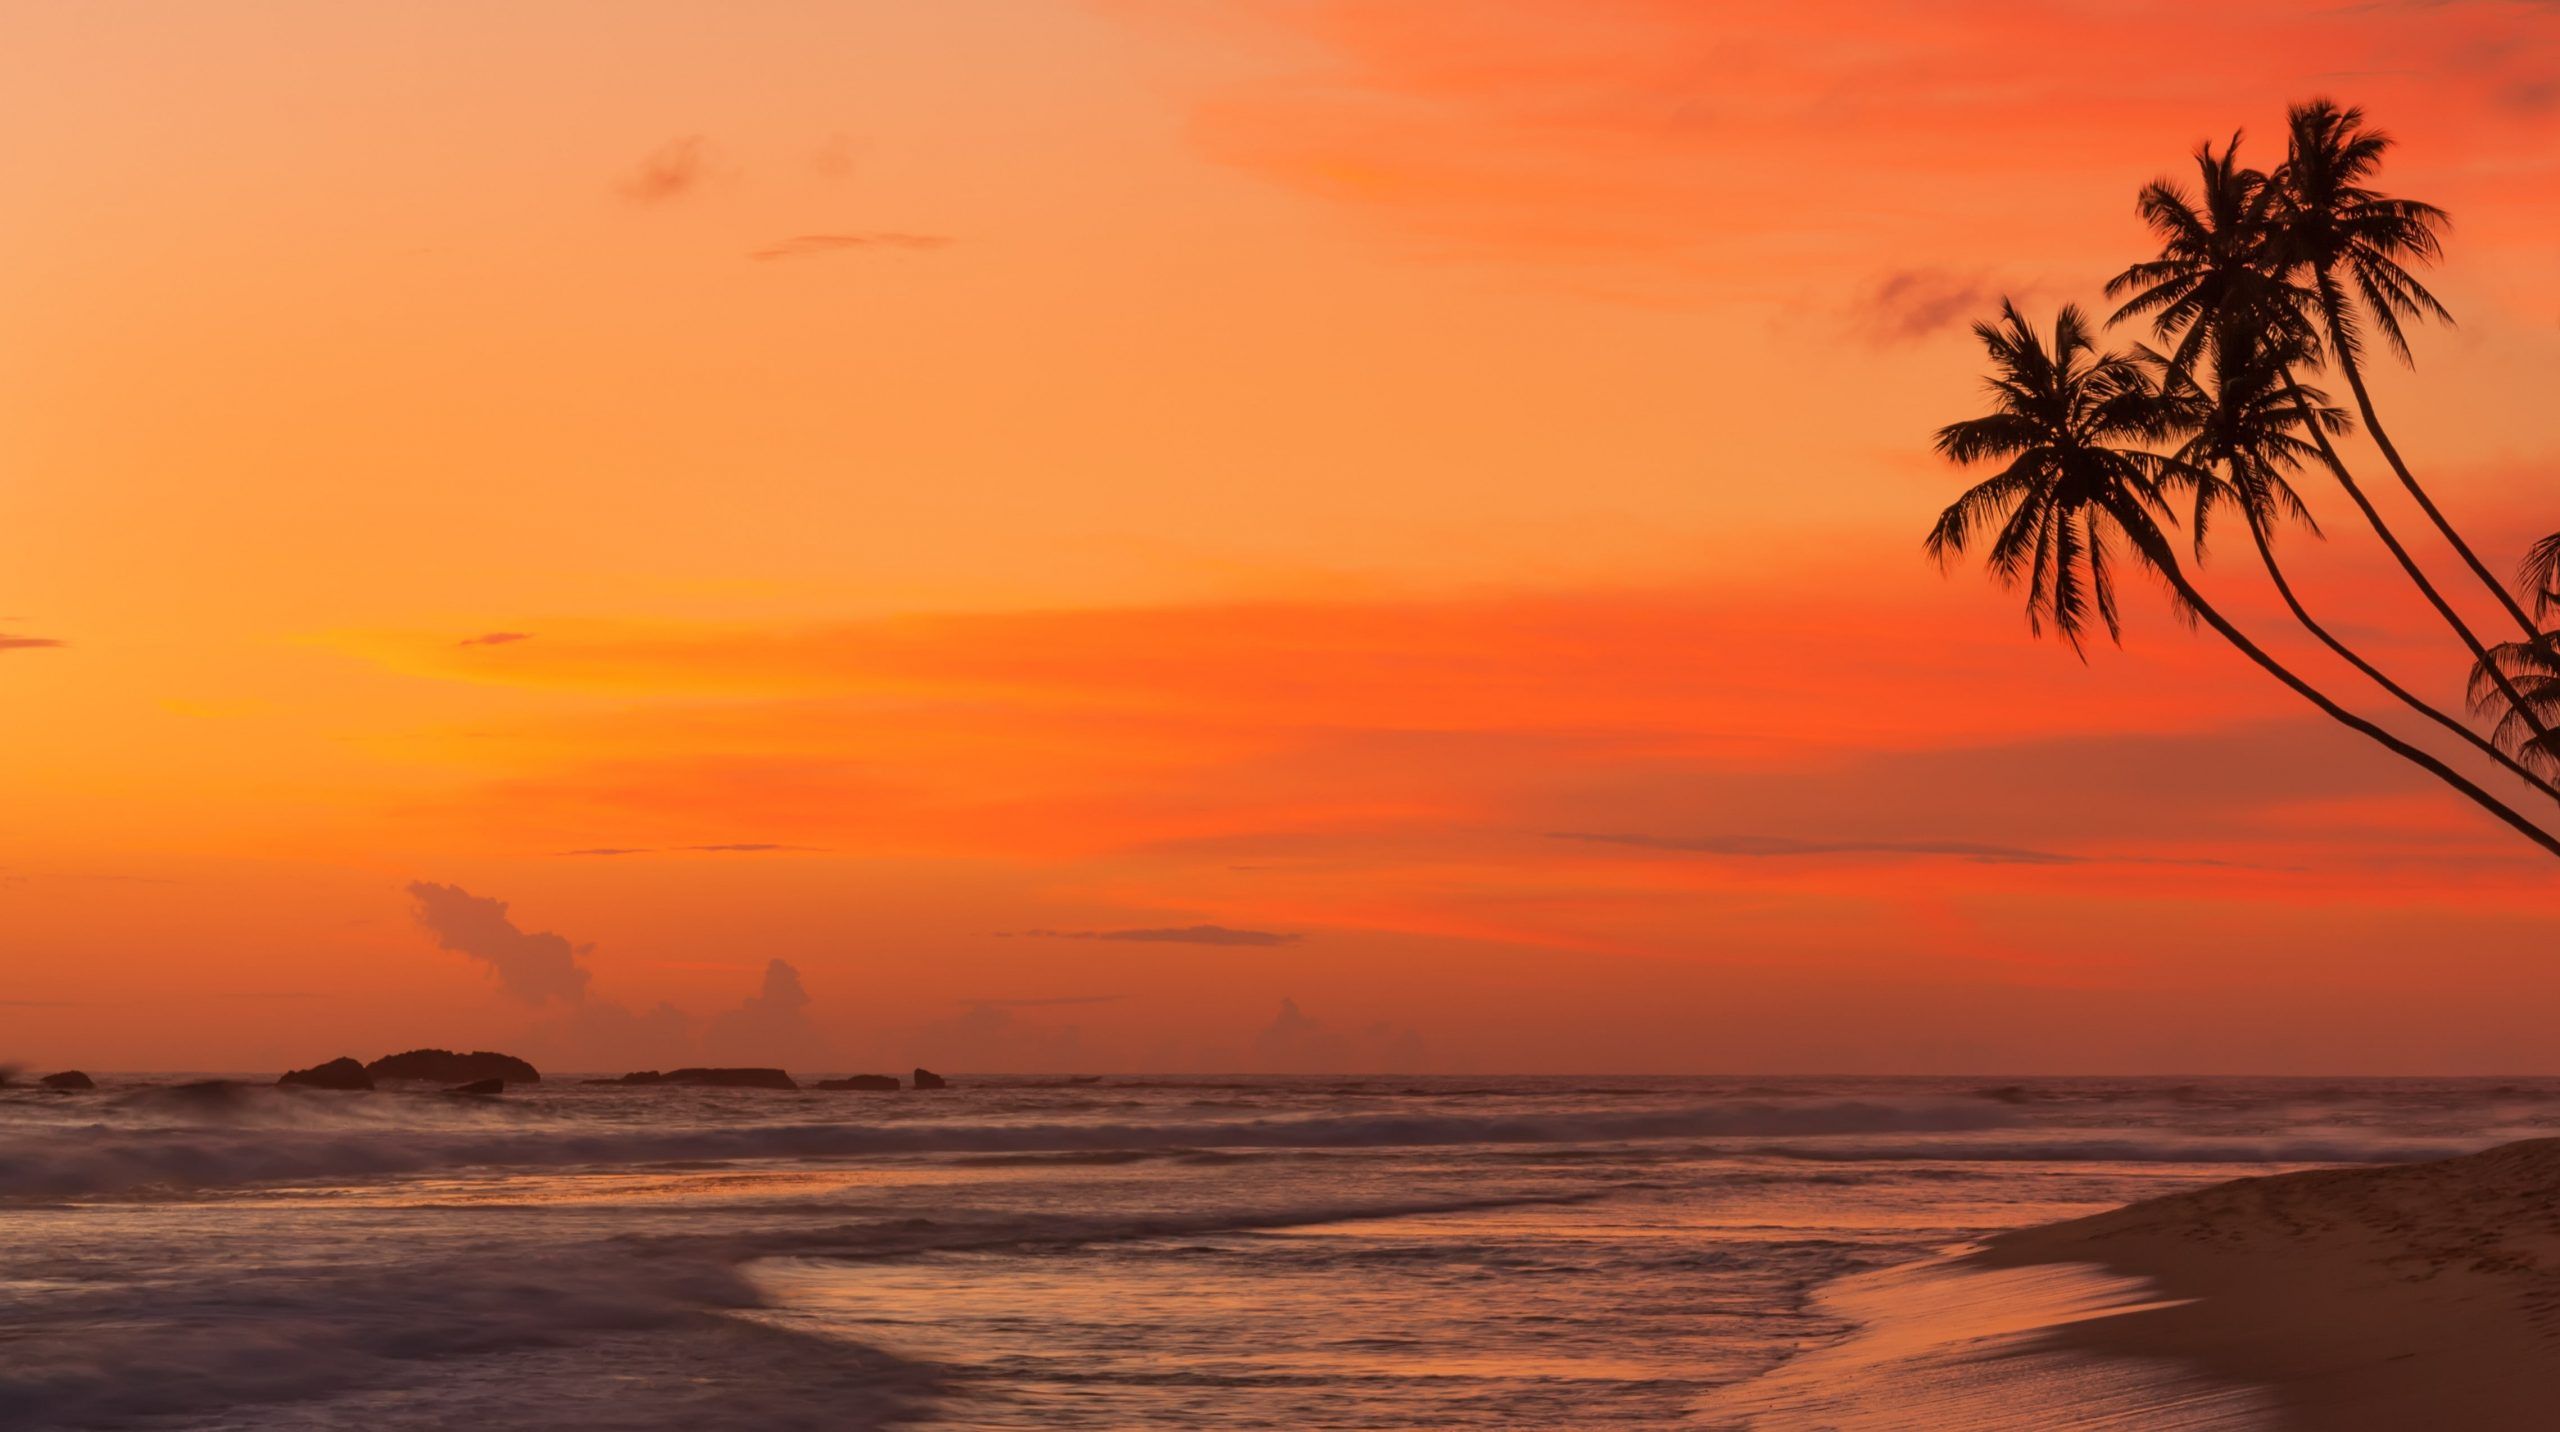 A beach with palm trees and an orange sunset - Tropical